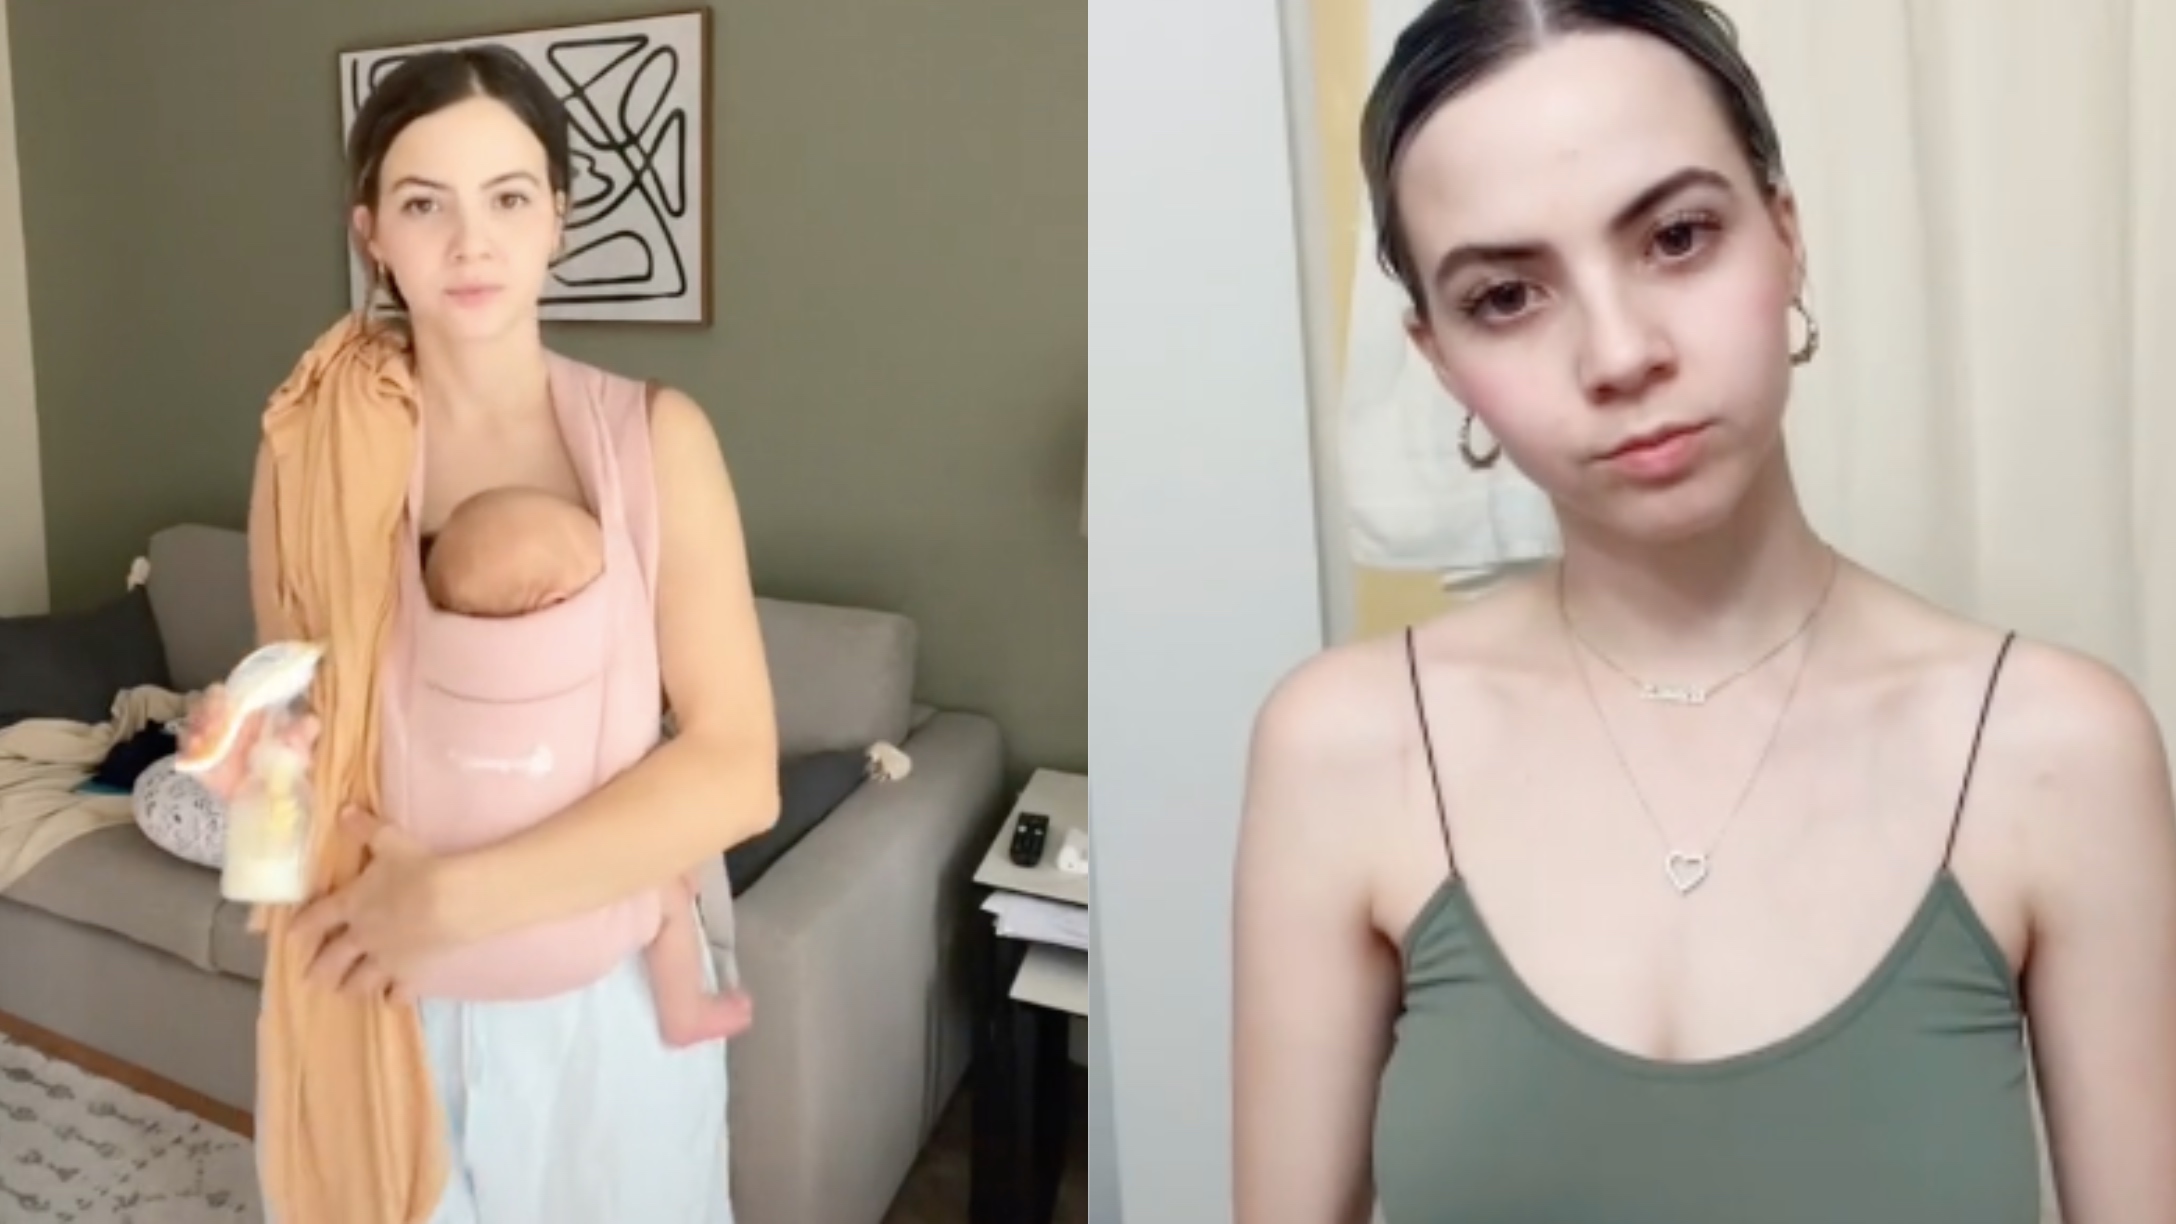 The Stay At Home Working Mom - This is motherhood. Uneven boobs, a